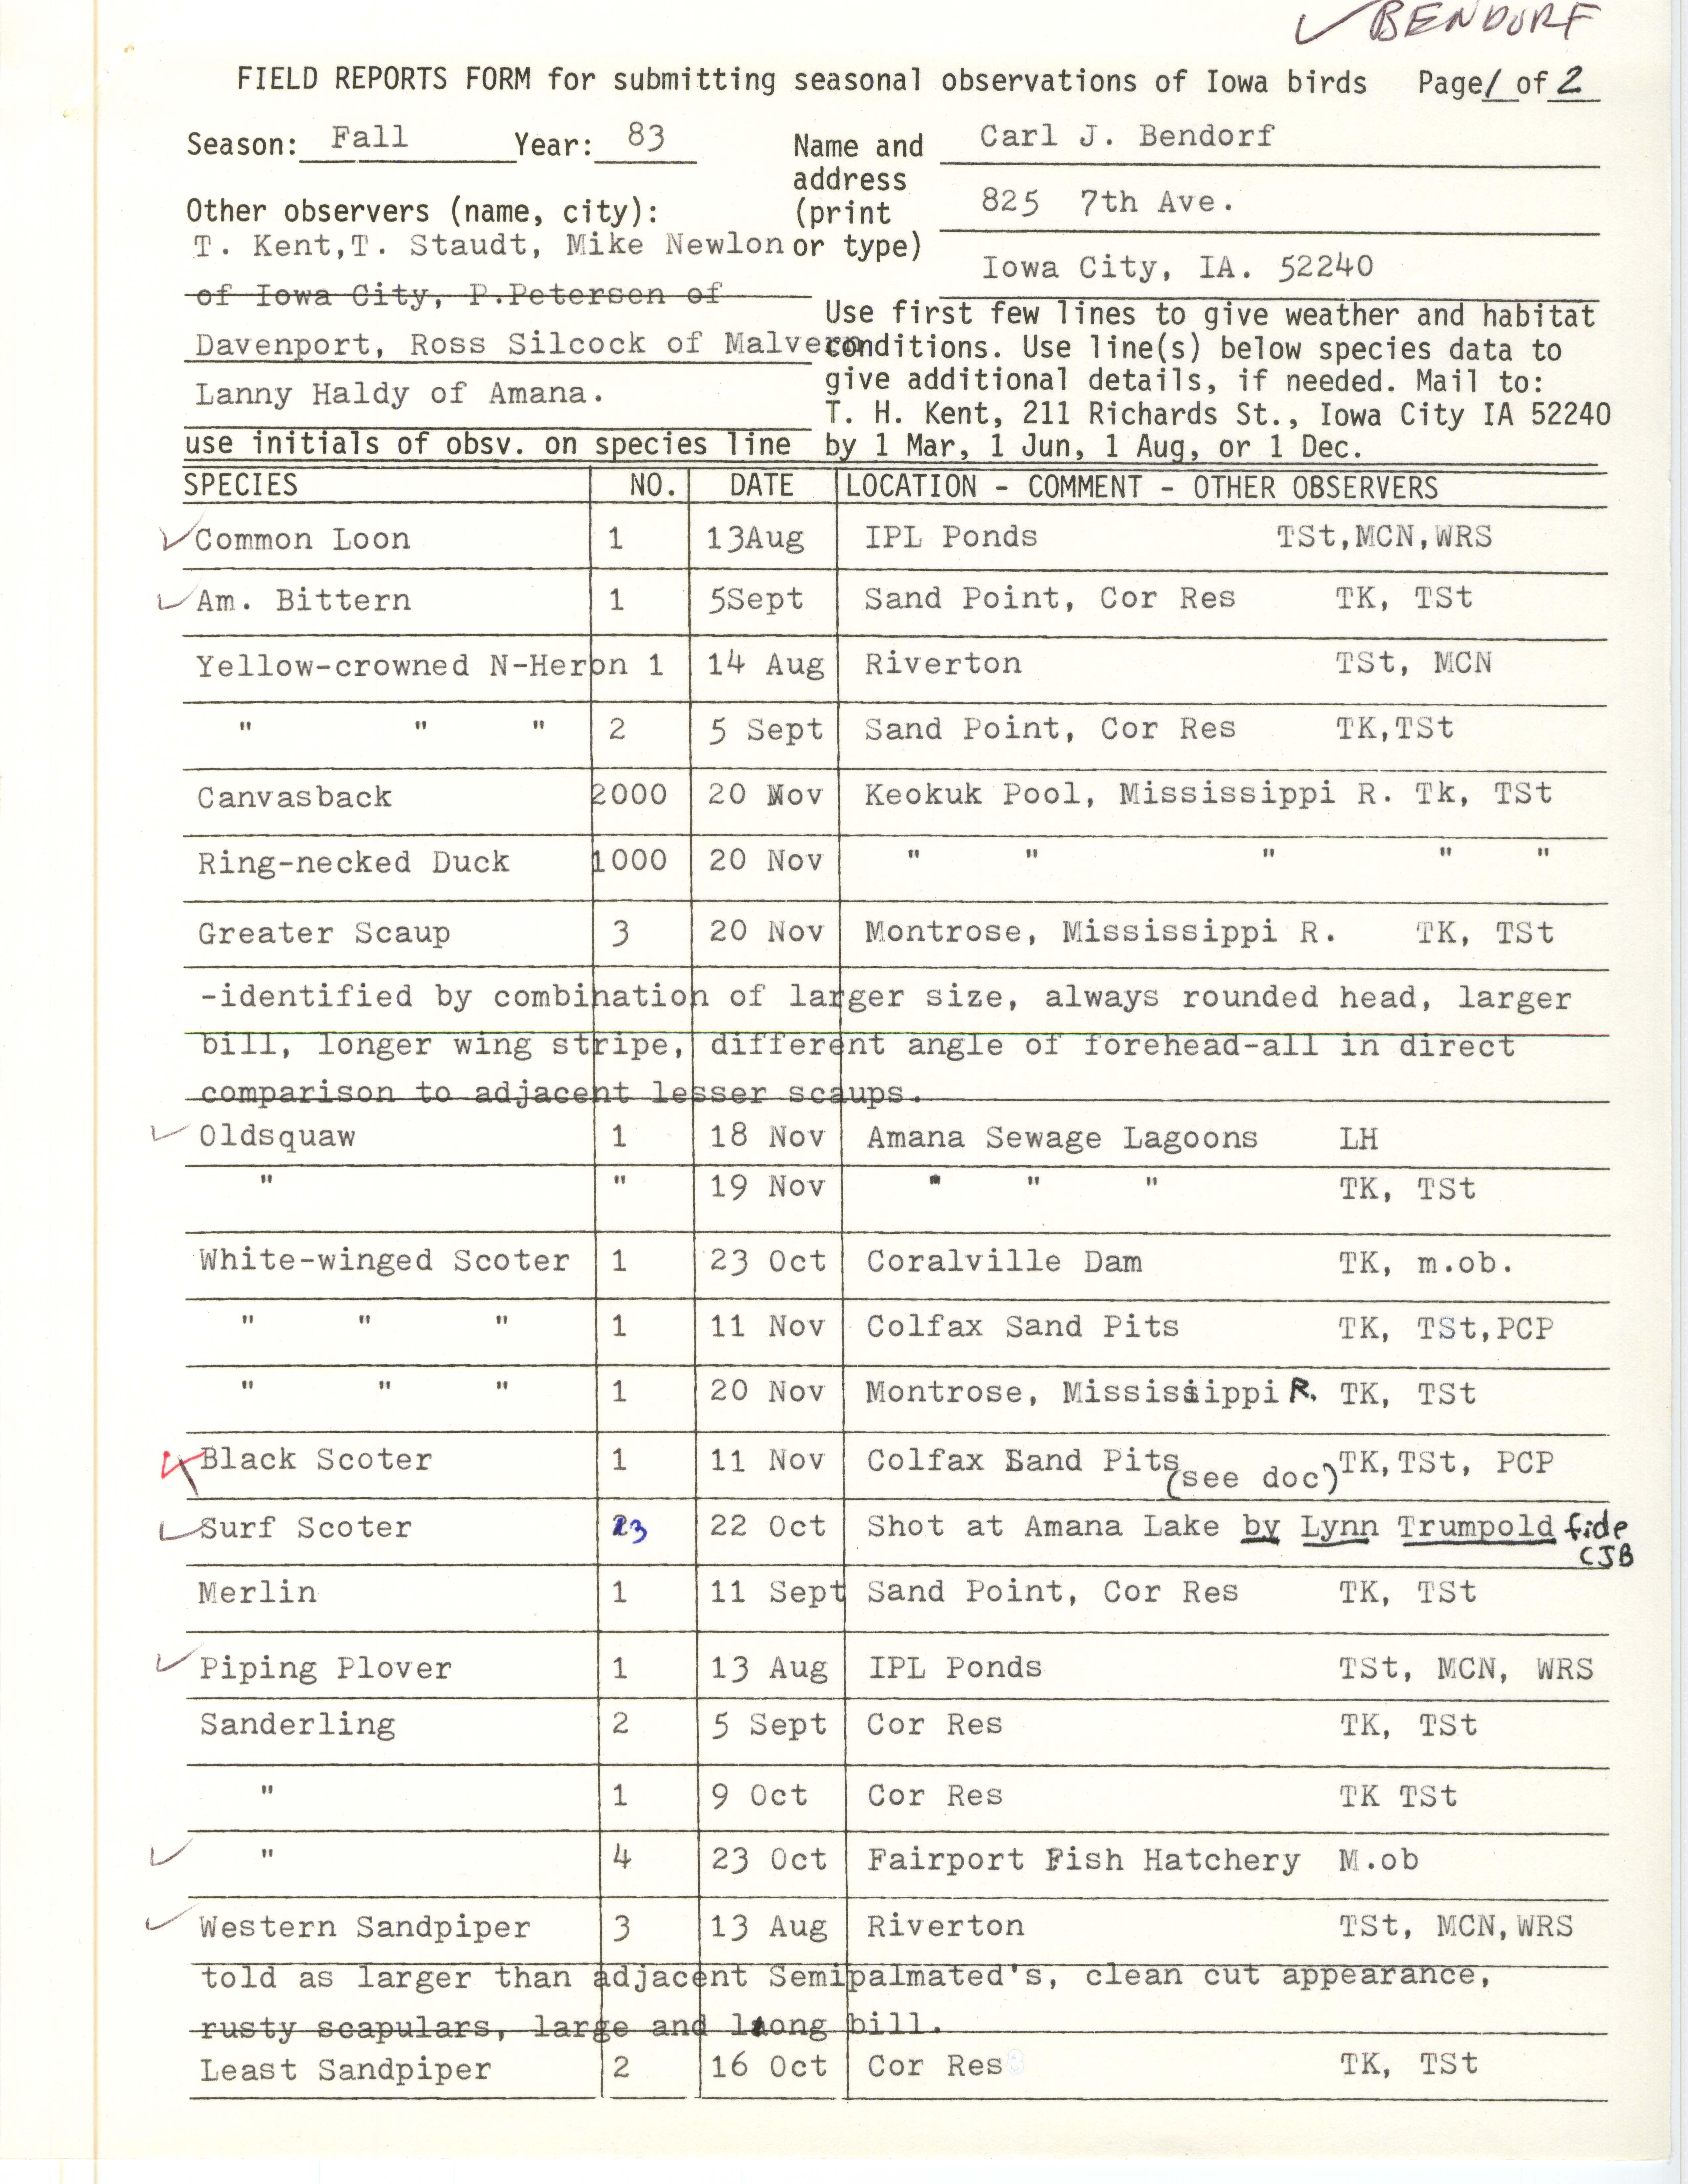 Field reports form for submitting seasonal observations of Iowa birds, Carl Bendorf, fall 1983